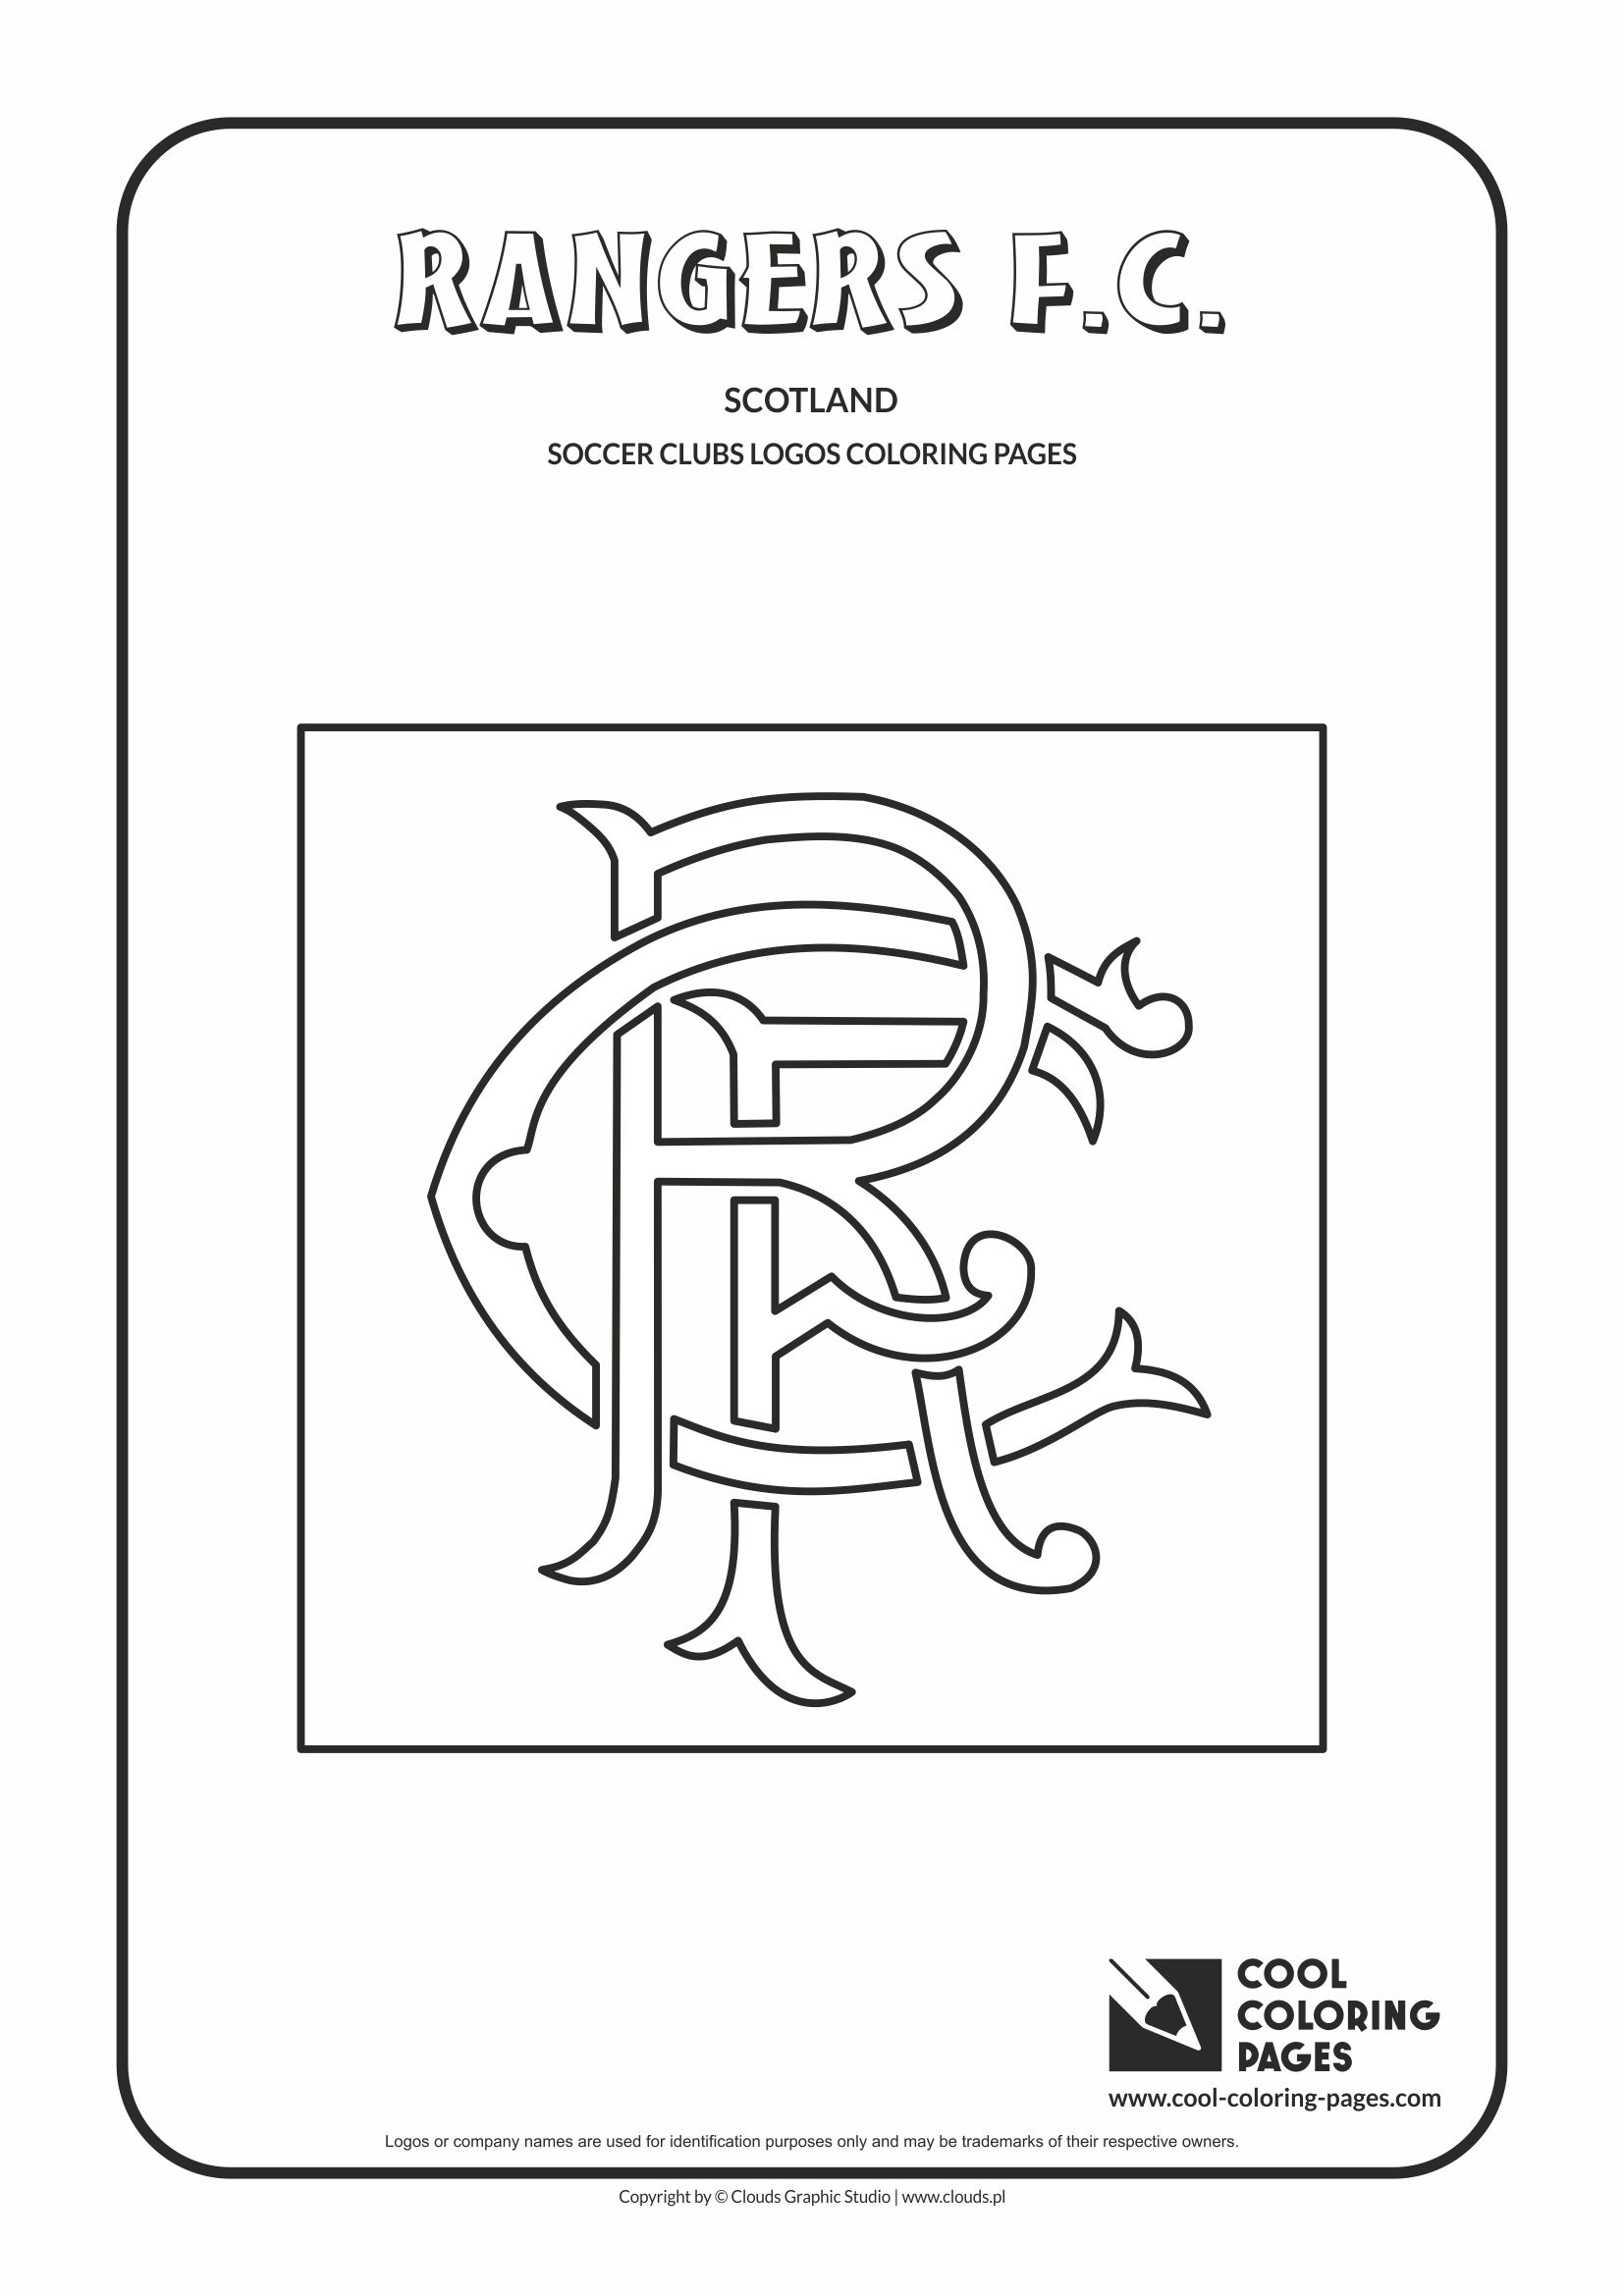 Download Cool Coloring Pages Soccer clubs logos - Cool Coloring Pages | Free educational coloring pages ...